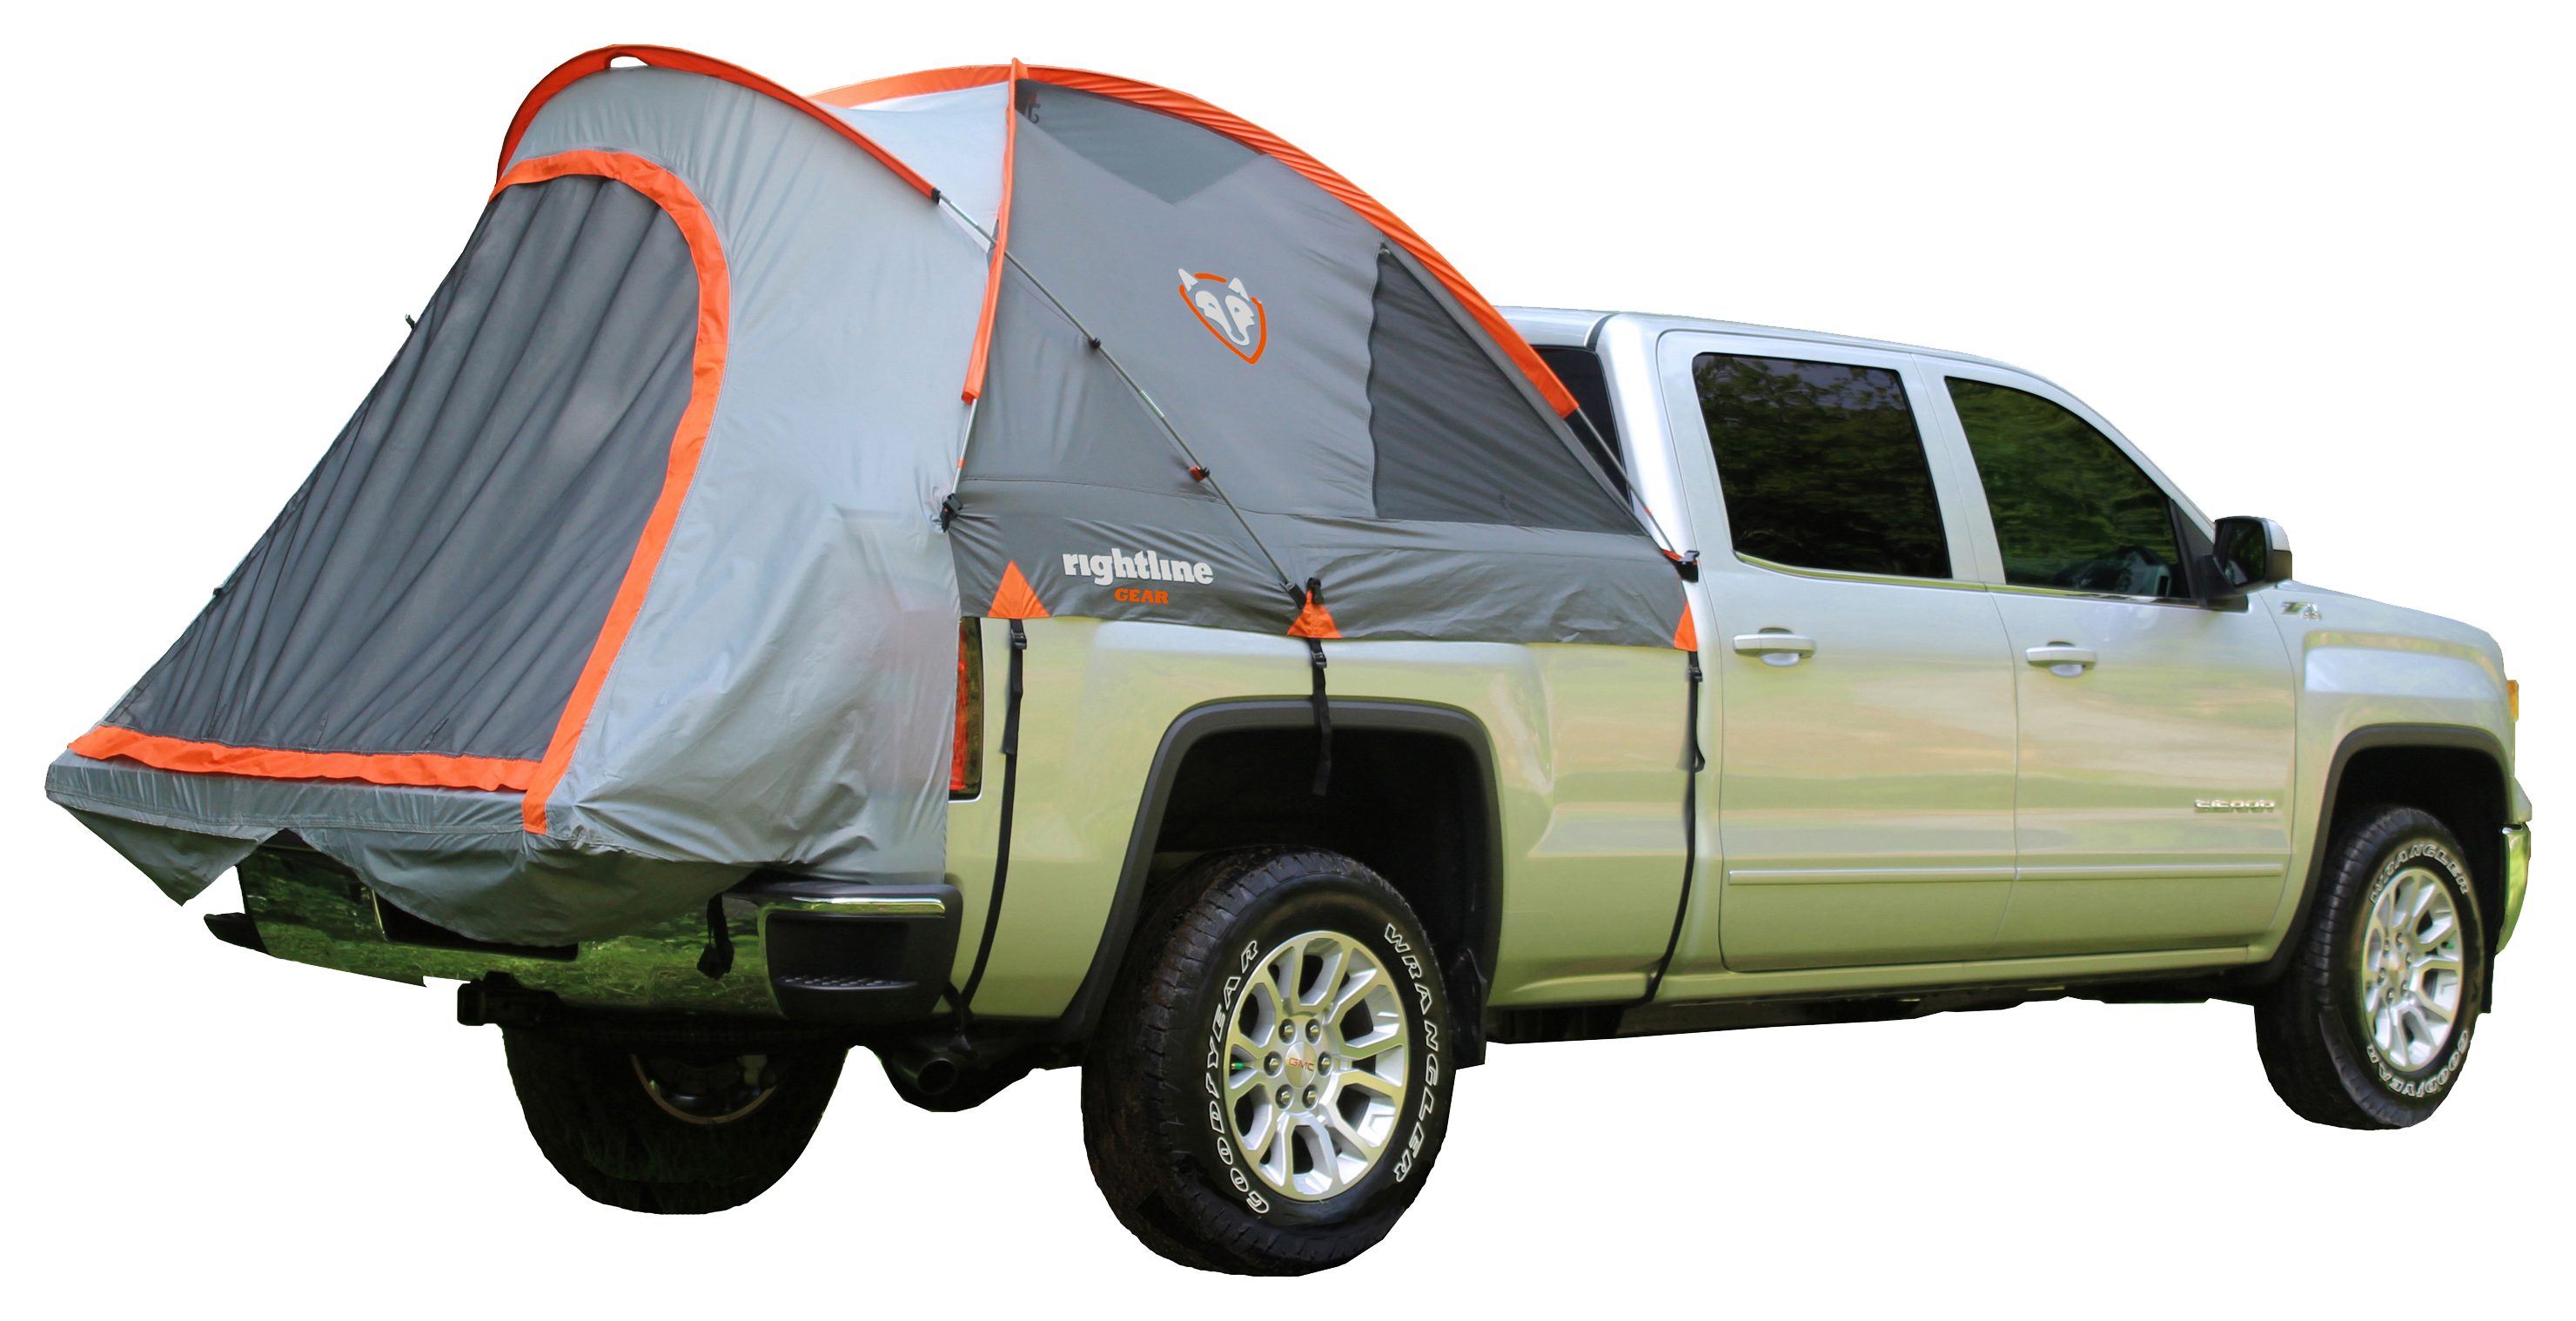 Rightline Gear 2-Person Truck Tent - 6' Mid-Size Long Bed